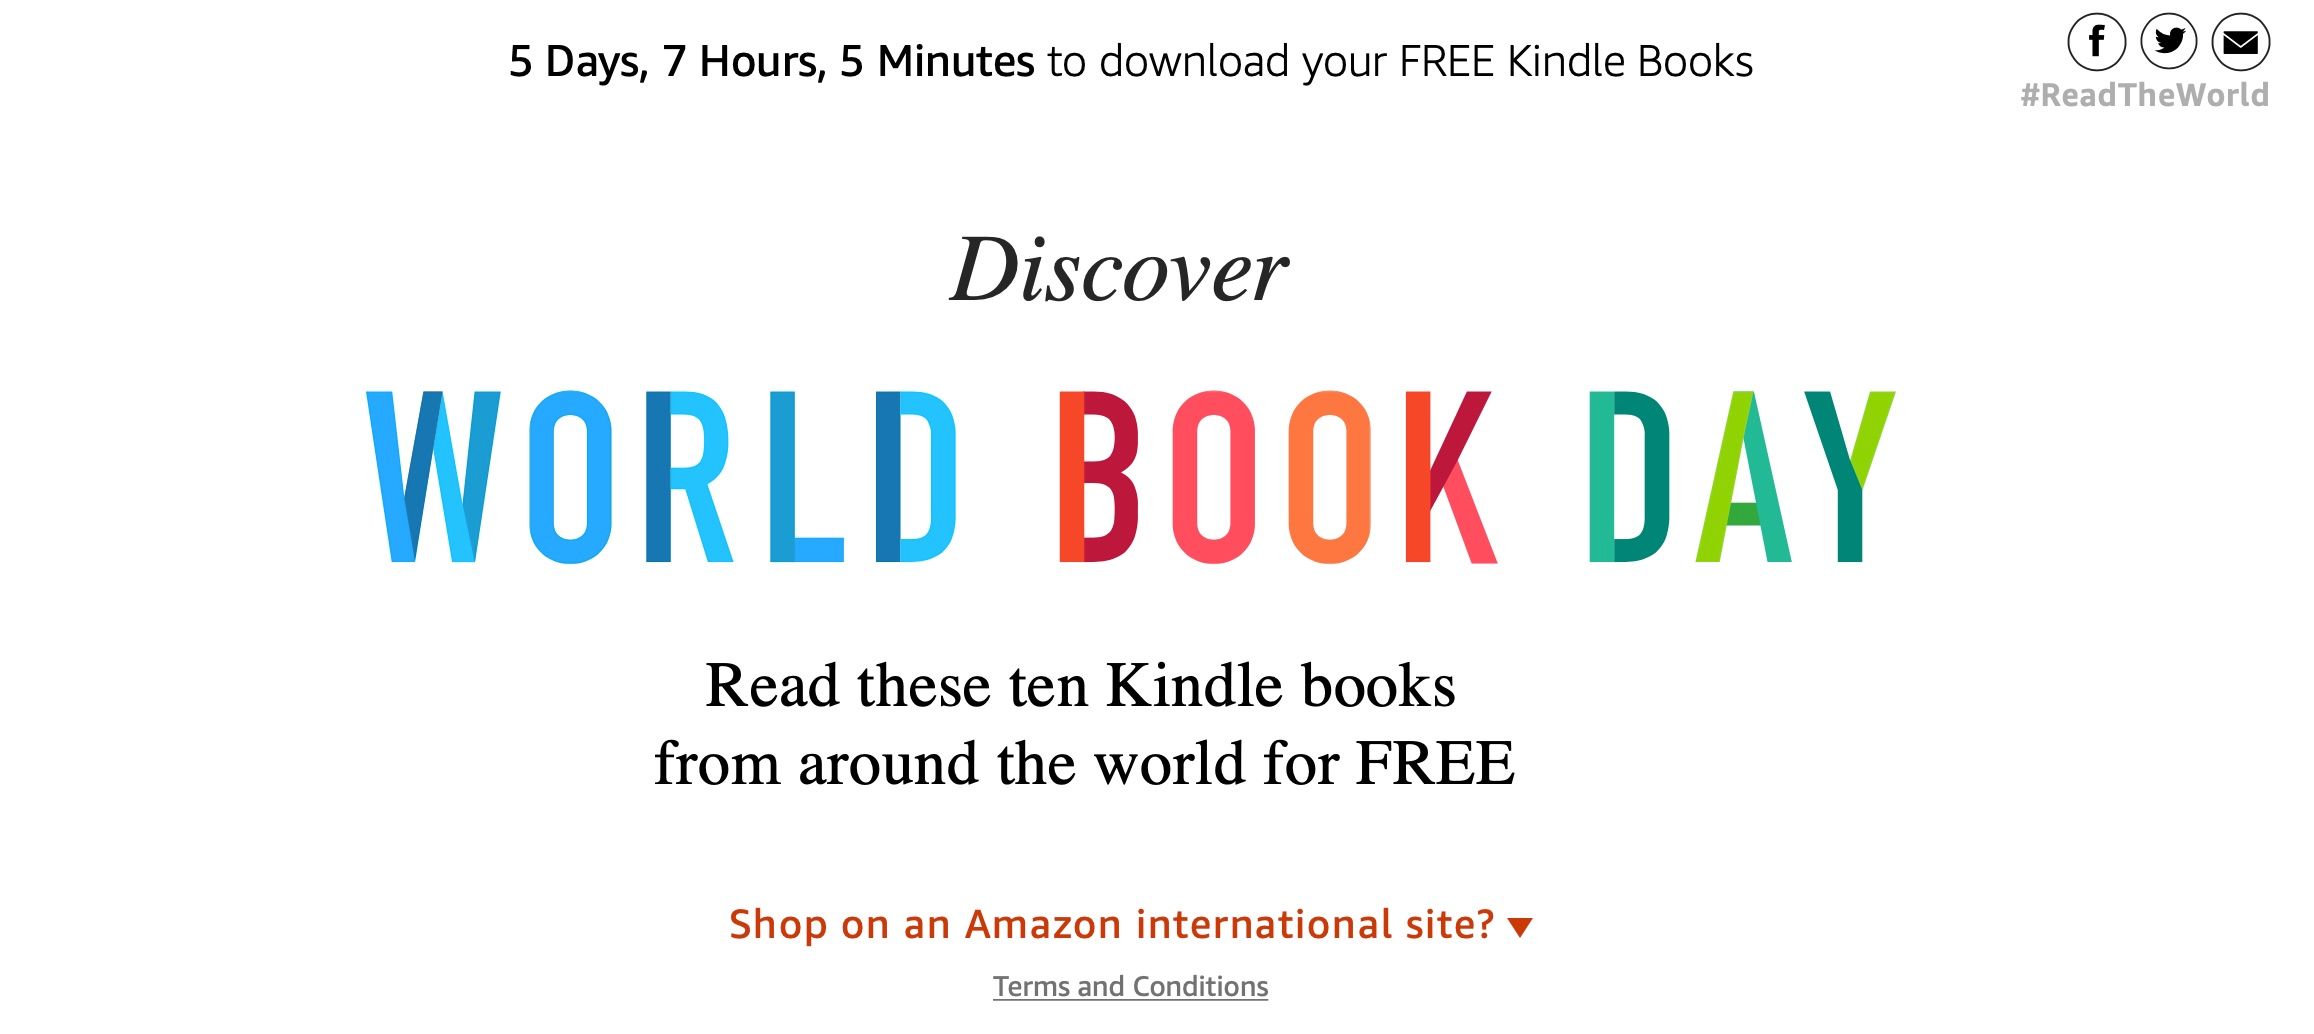 Amazon Read the World page